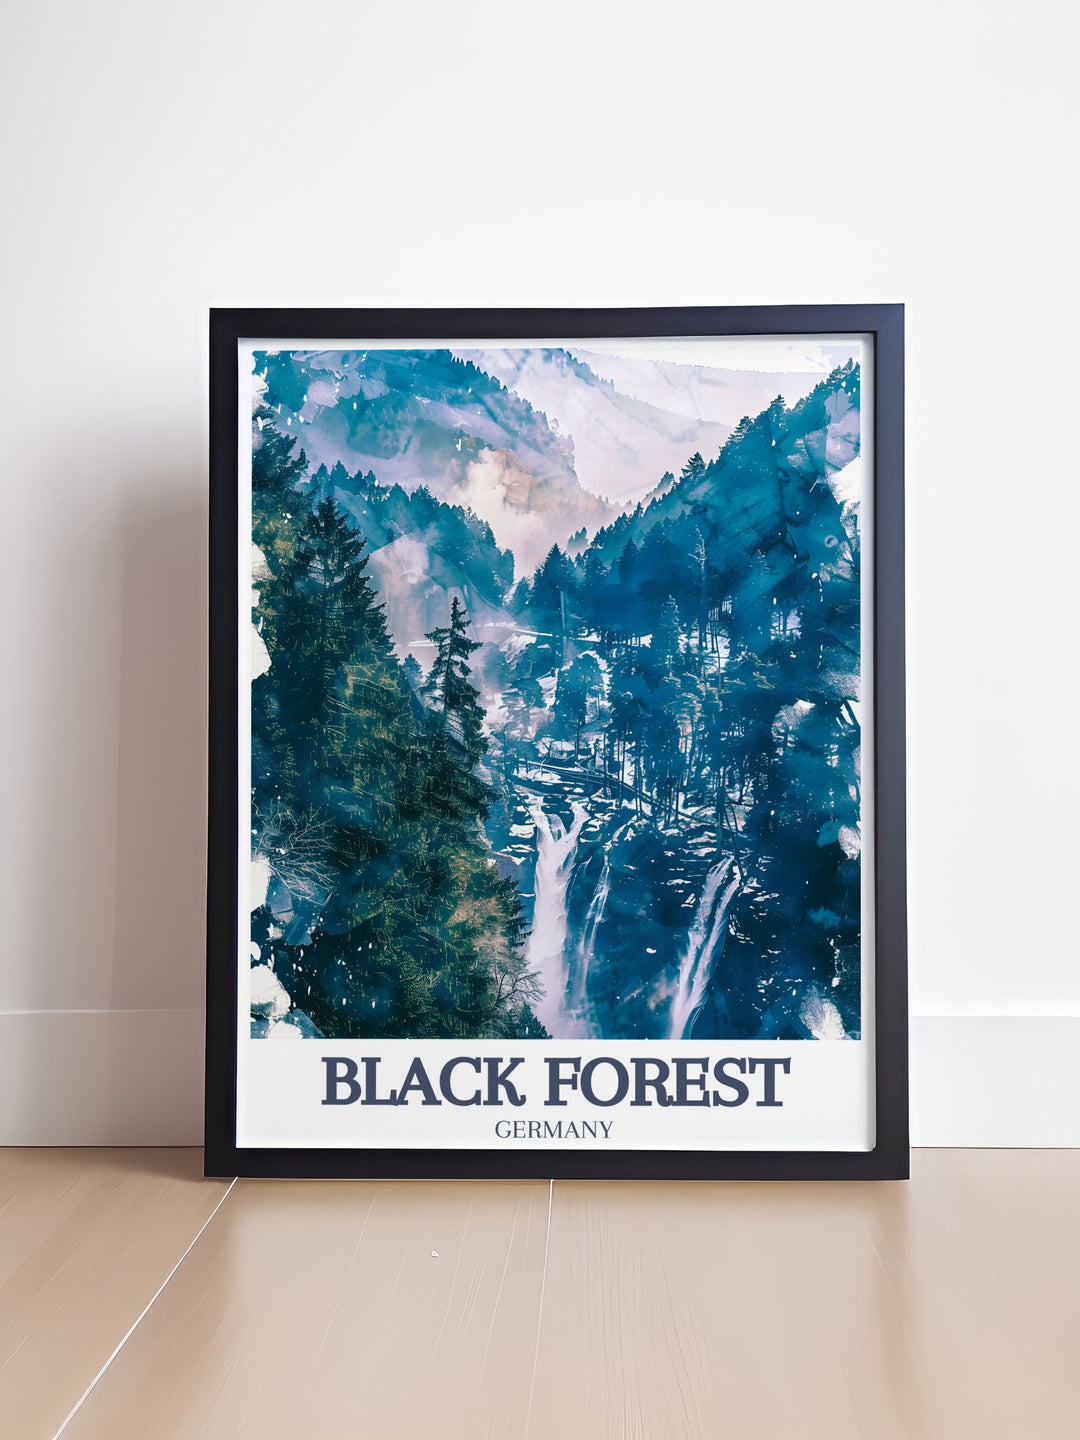 Triberg Waterfalls, Baden Wurttemberg beautifully captured in this Germany Forest Print highlighting the tranquil beauty of the Schwarzwald region perfect for Black Forest decor and an excellent gift idea for birthdays anniversaries or special occasions celebrating natures splendor